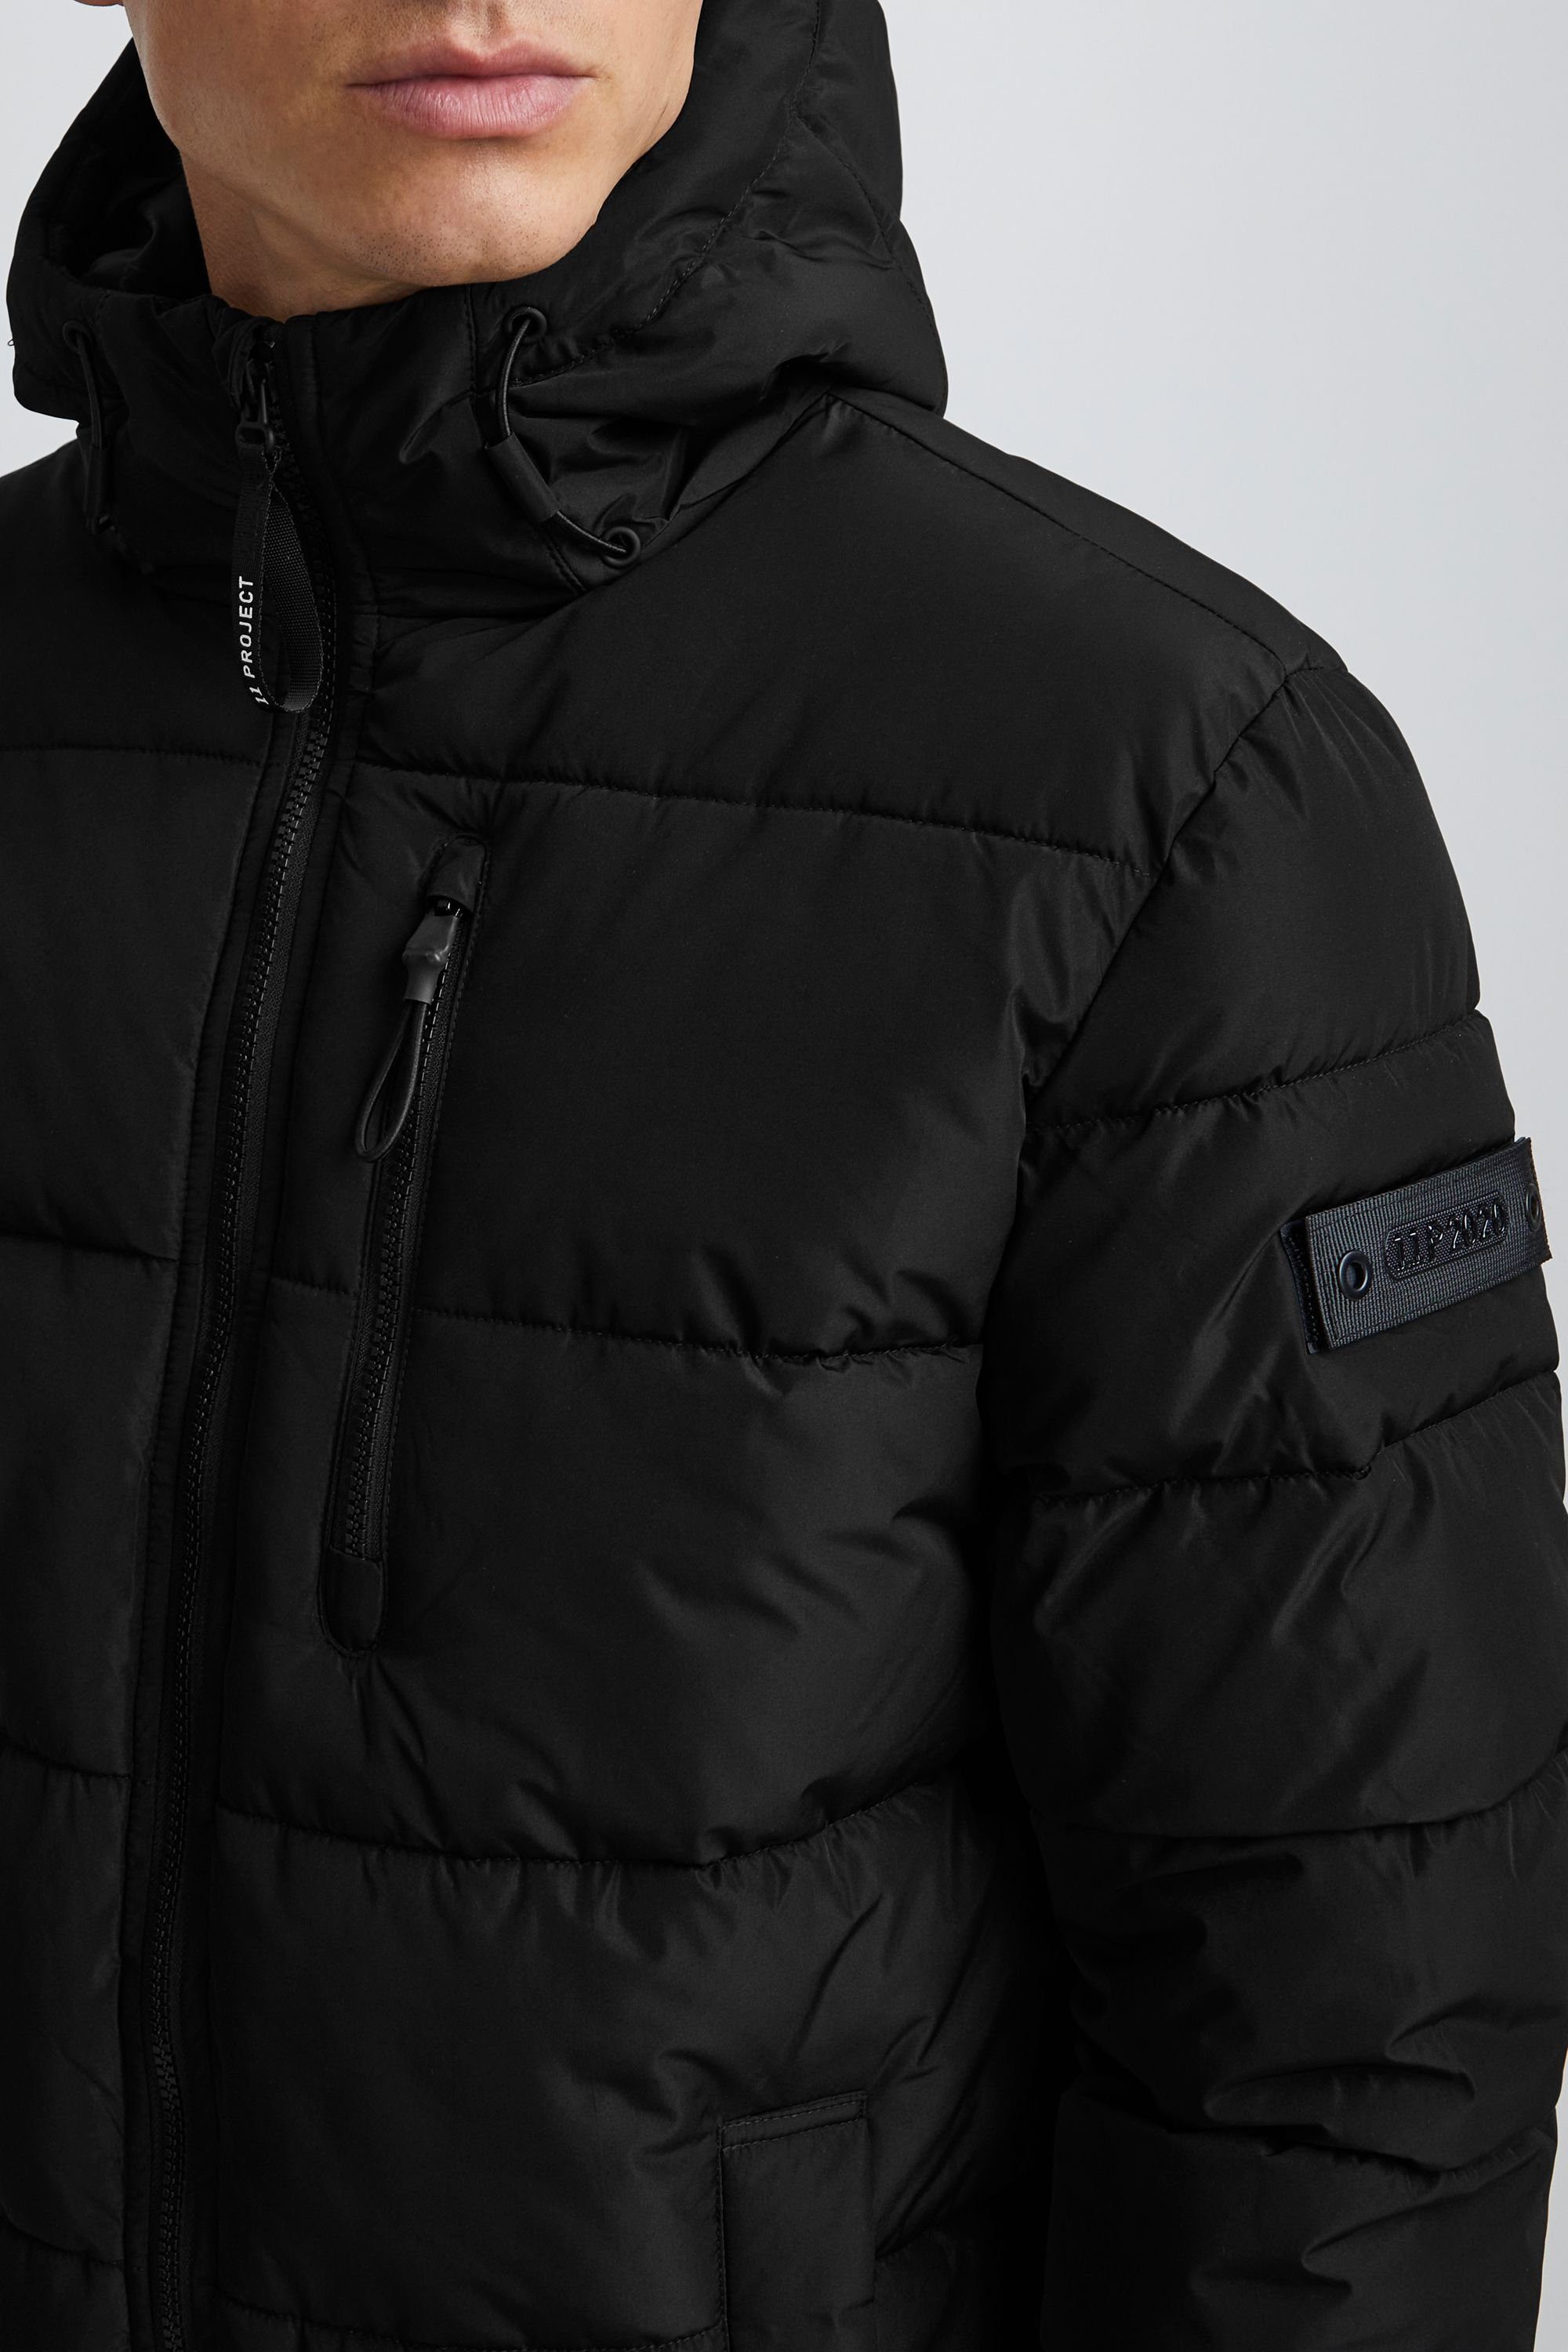 Project Parka Parka Project Long 11 Tibor Black quilted 11